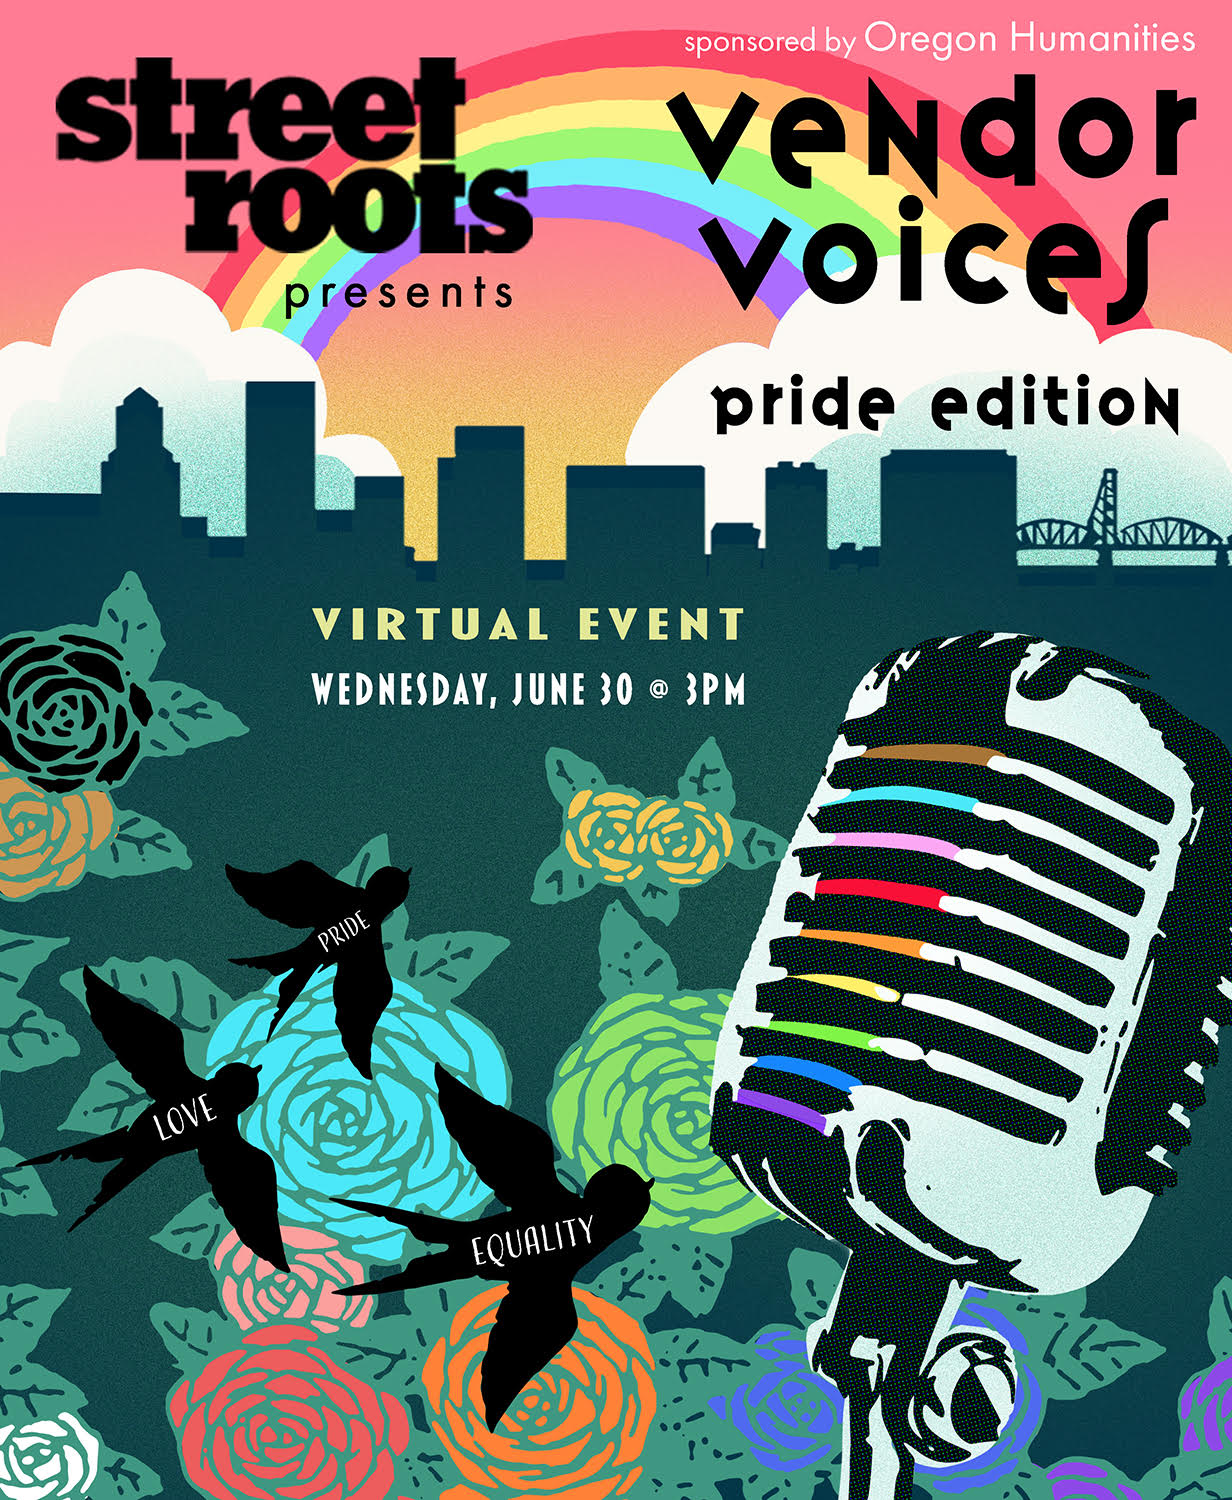 Image of various birds and microphones with a rainbow background